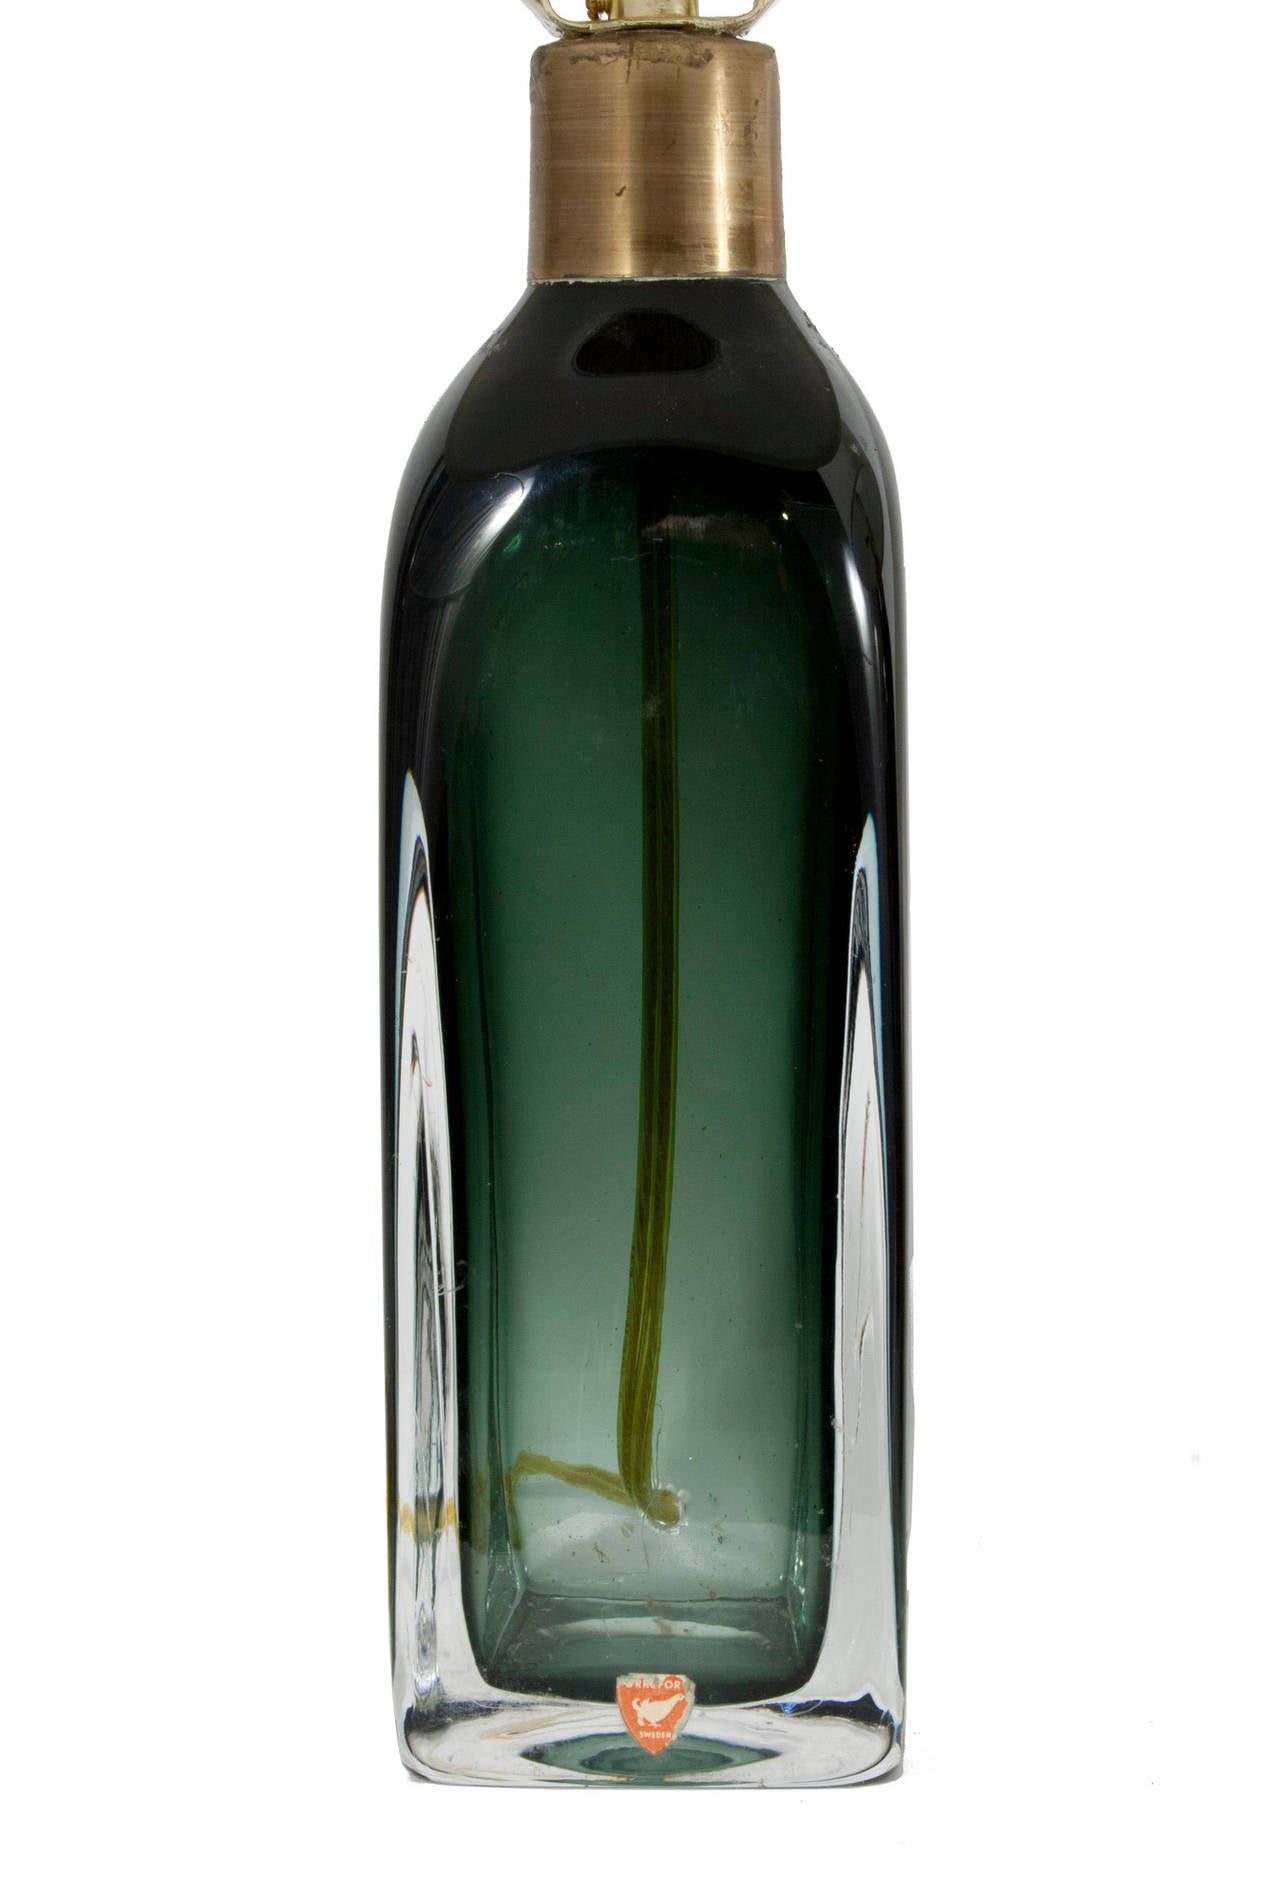 Pair of green table lamps by Carl Fagerlund, made for Orrefors in the Graal manner where one layer of colored glass is encased in another layer of colorless transparent glass.